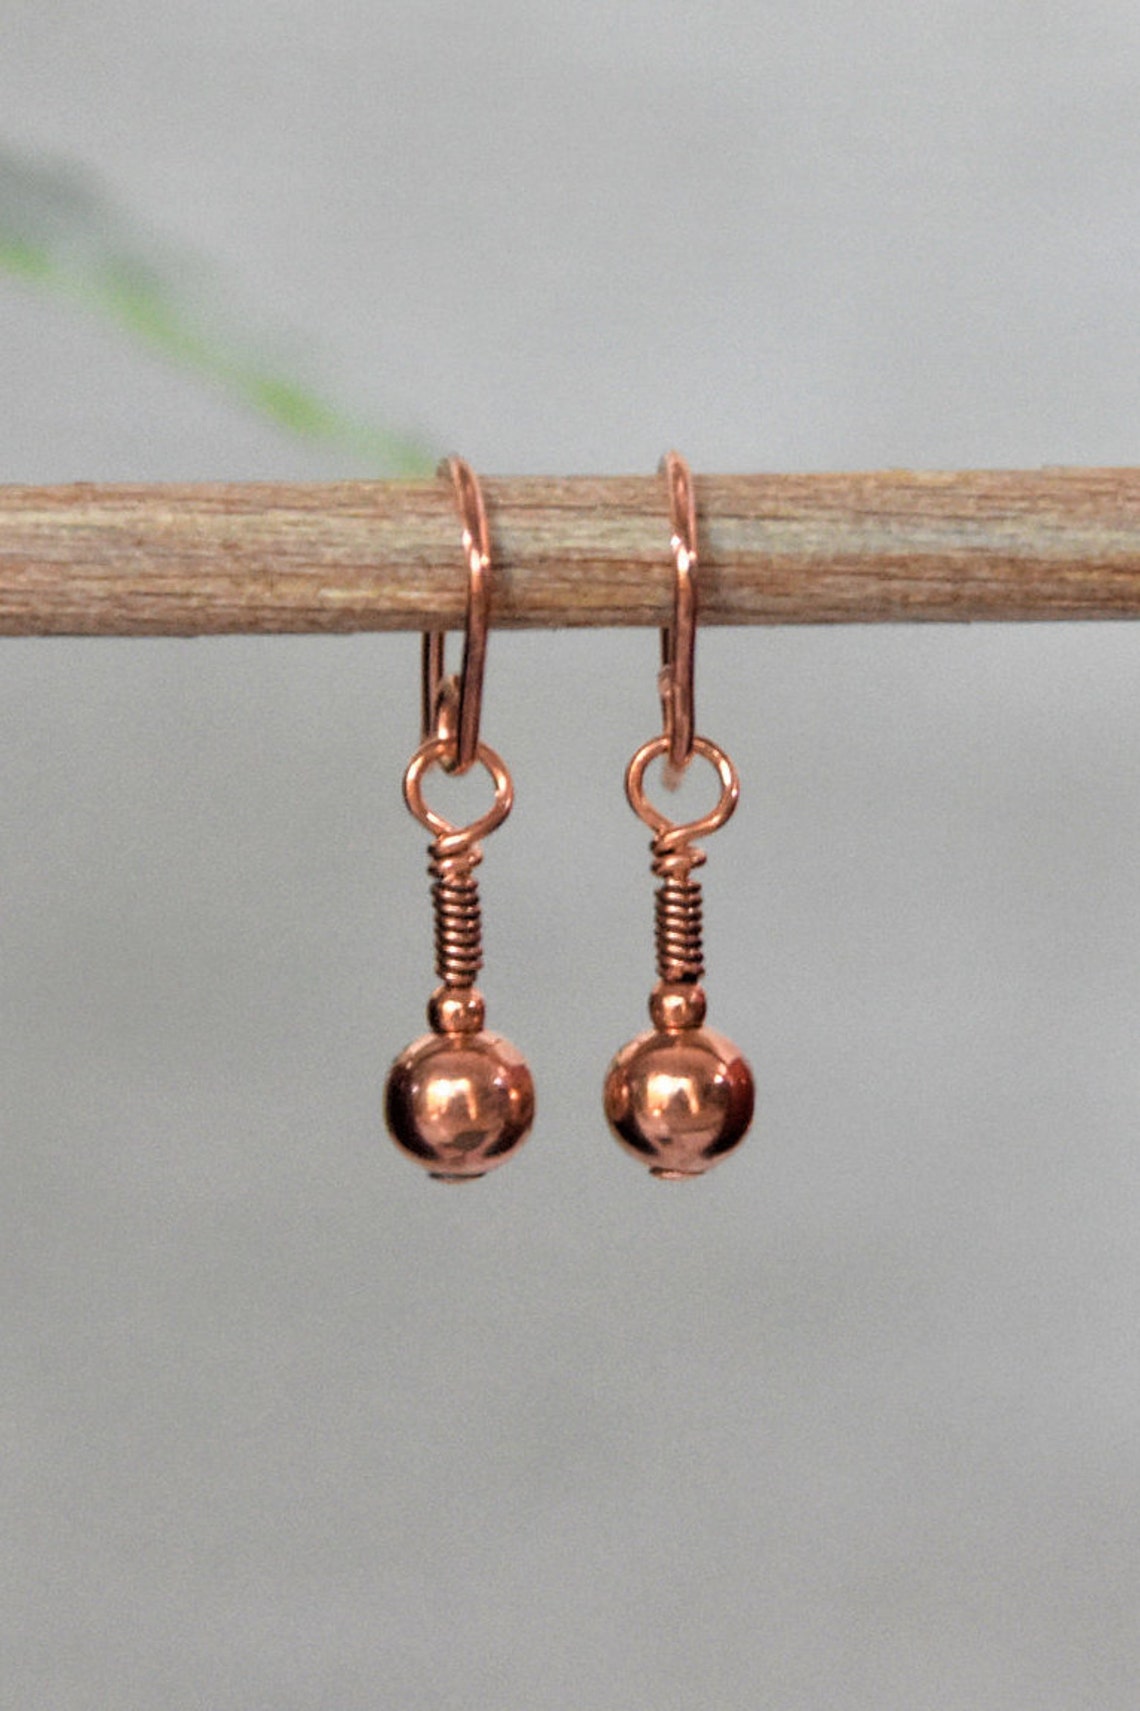 Tiny Copper Earrings Tiny Unique Copper Earrings Simple - Etsy